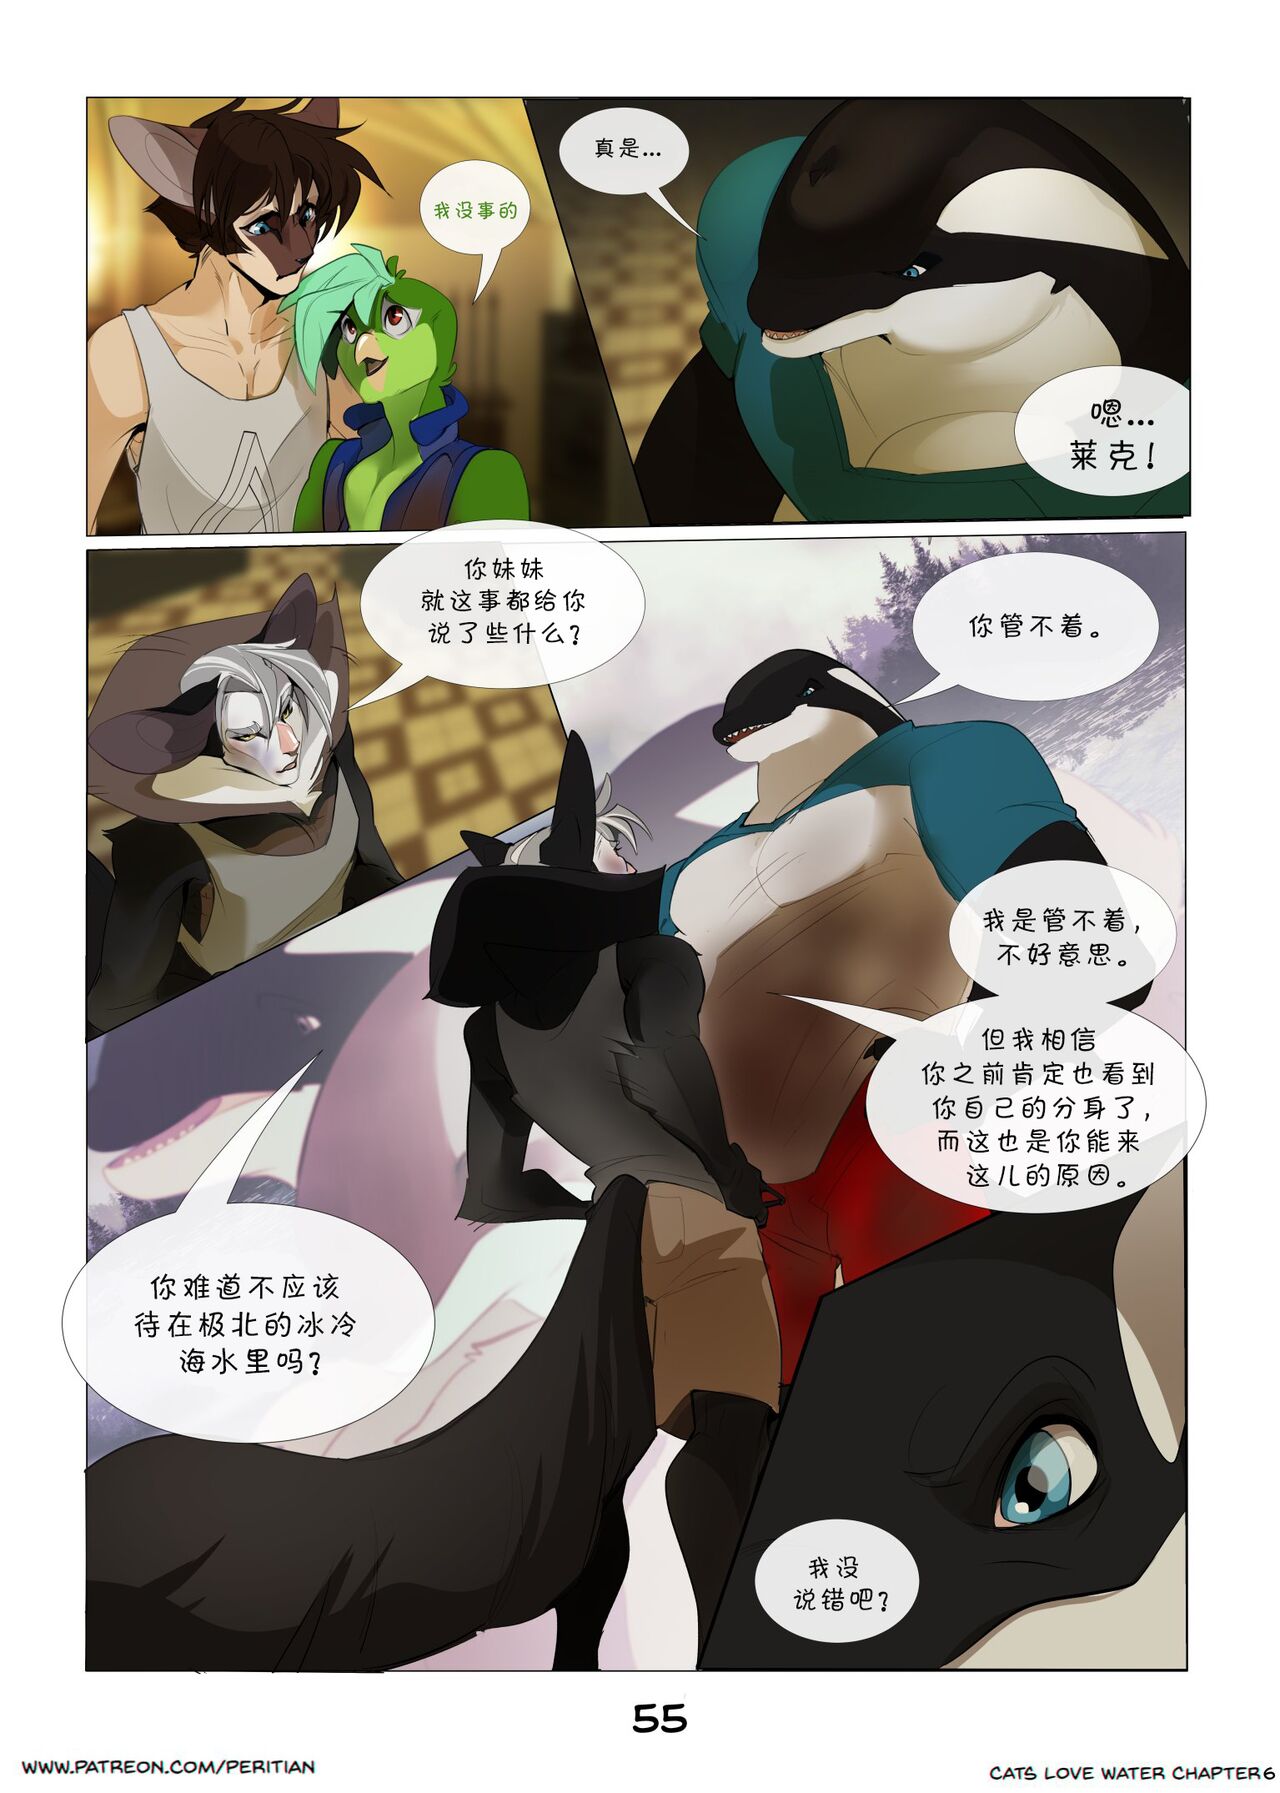 [Peritian] Cats love water7 | 双猫戏水7(ongoing) [Chinese]305寝个人汉化 